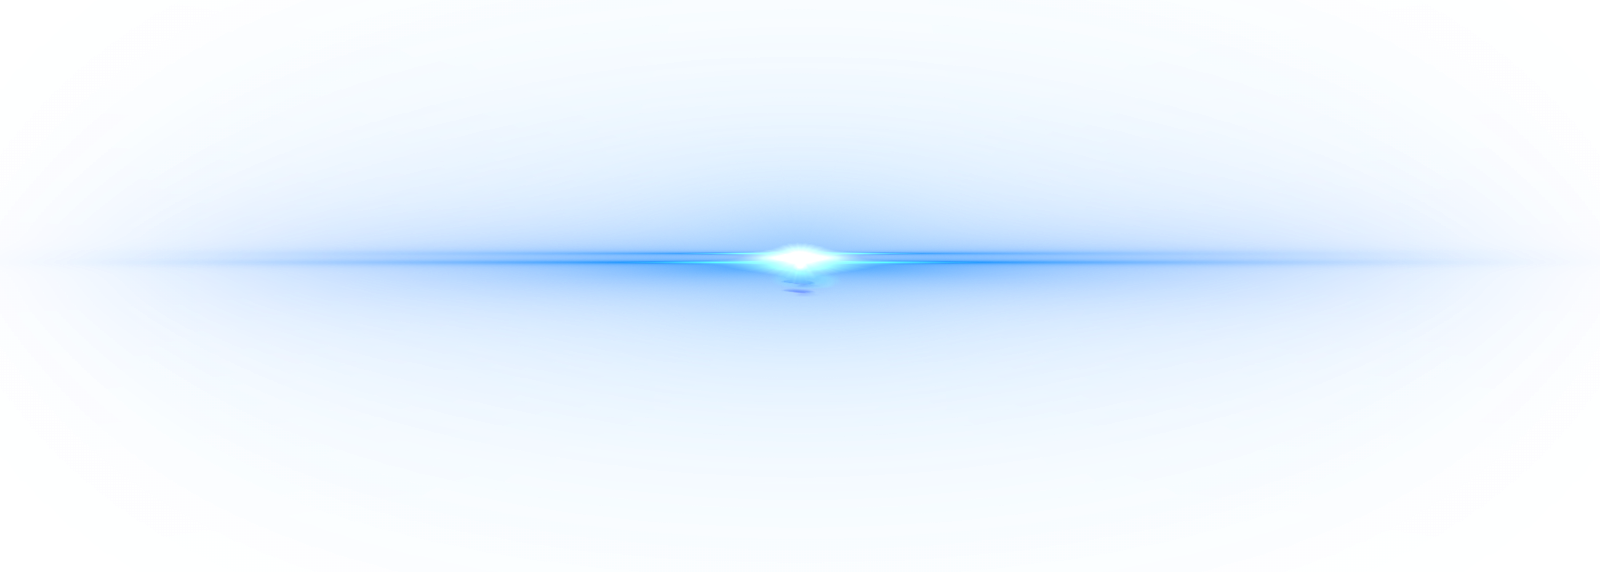 Abstract Blue Light Flare PNG image